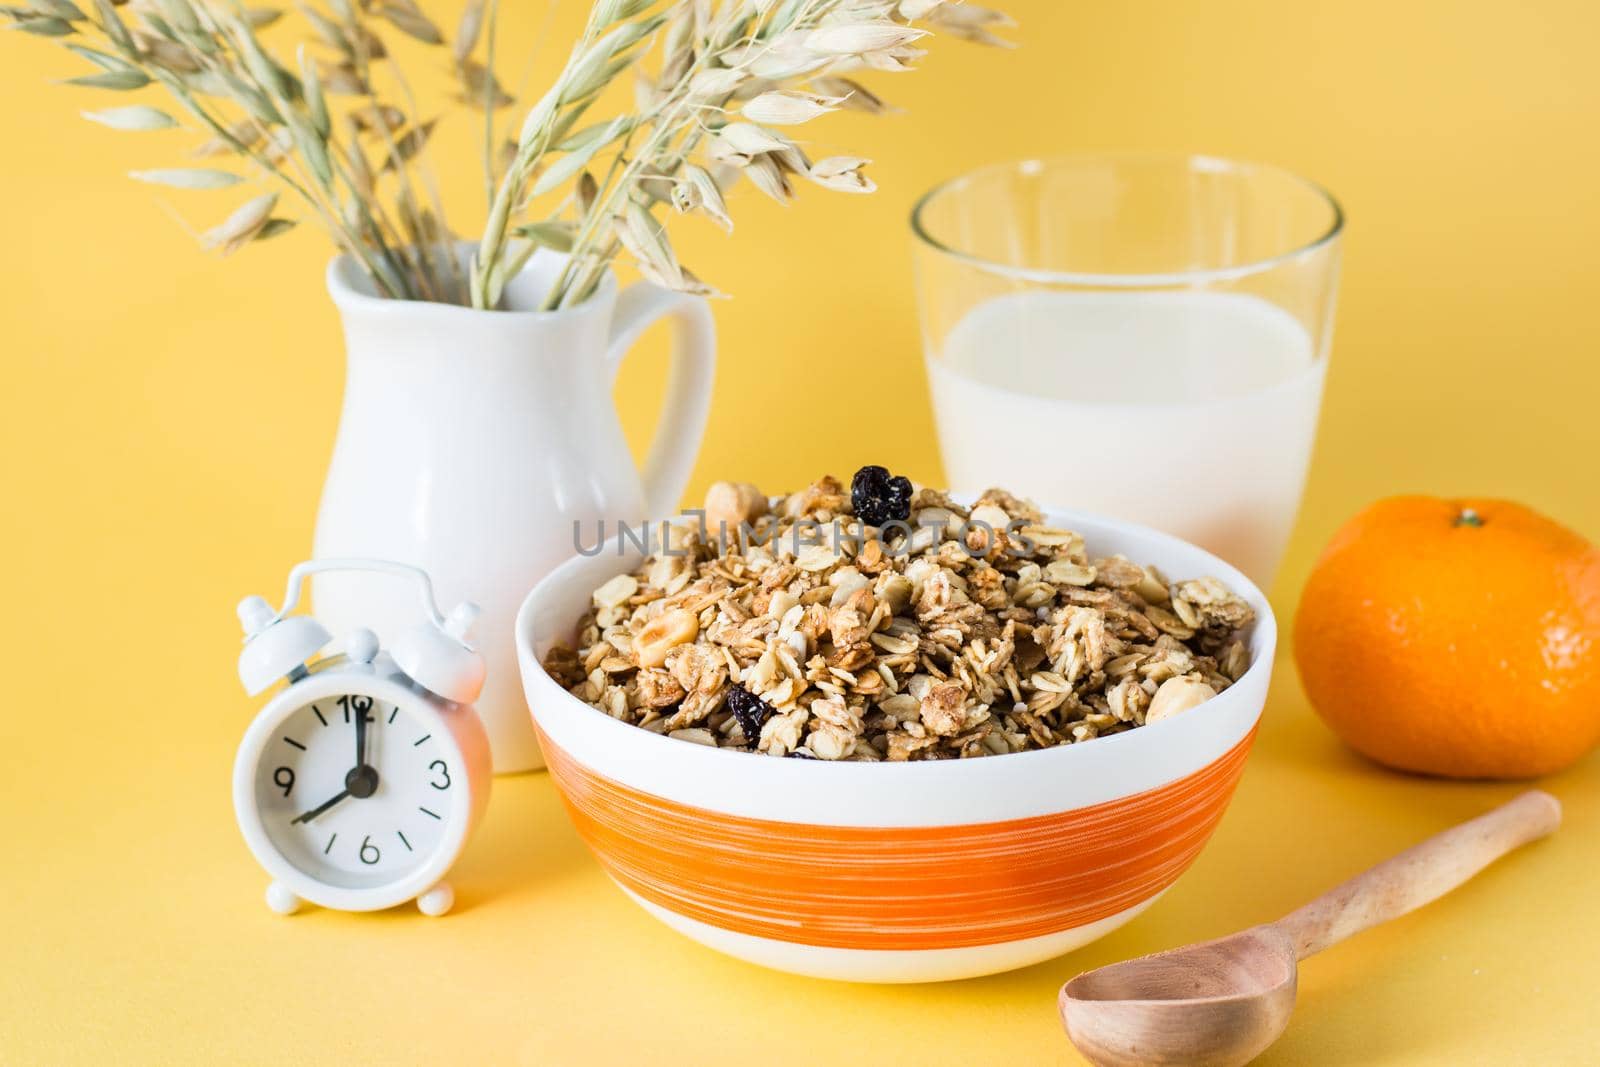 Healthy hearty breakfast. Baked granola of oats, nuts and raisins in a bowl, a glass of milk, an orange and an alarm clock on a yellow background